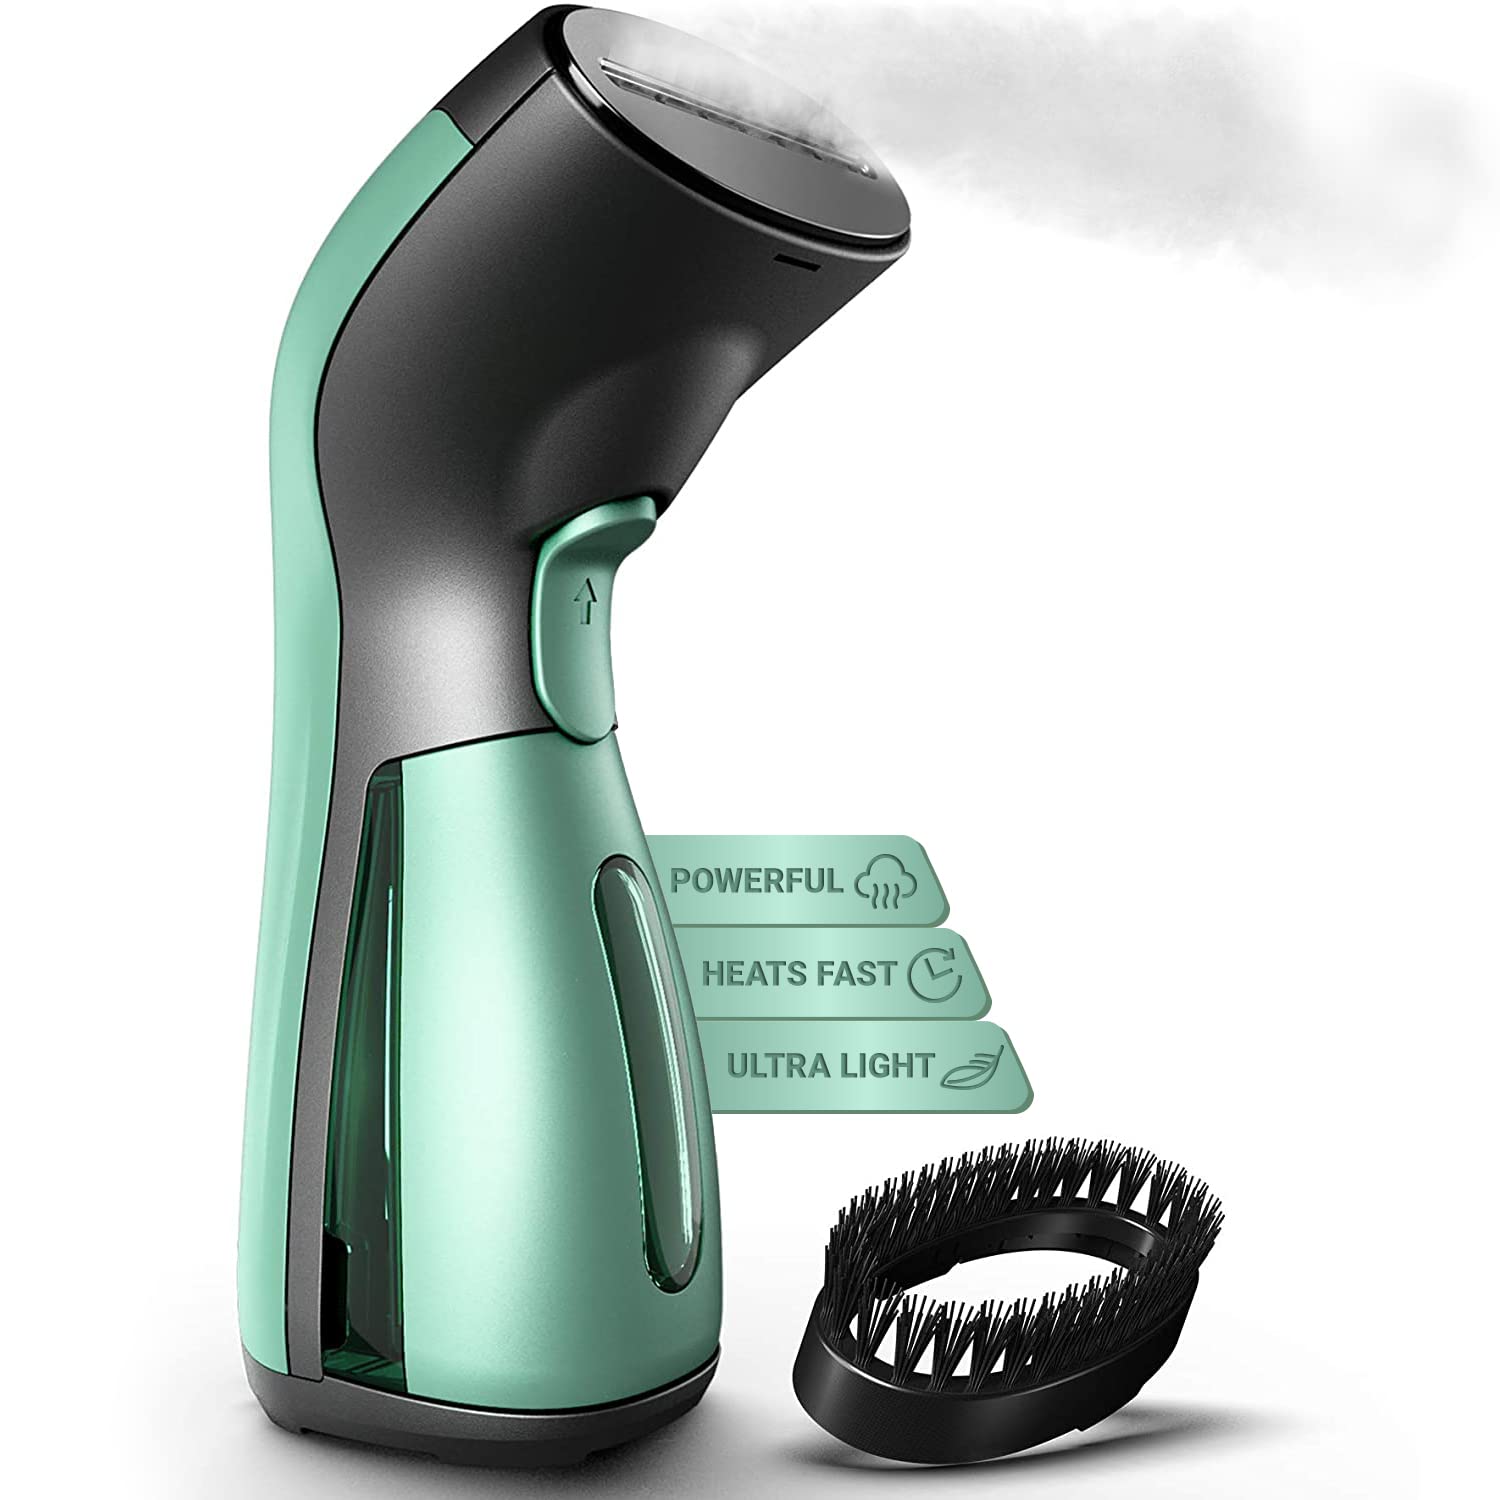 iSteam Steamer for Clothes [Luxury Edition] Powerful Dry Steam. Multi-Task: Fabric Wrinkle Remover- Clean- Refresh. Handheld Clothing Accessory. for All Kind of Garments. Home/Travel [MS208 Green]